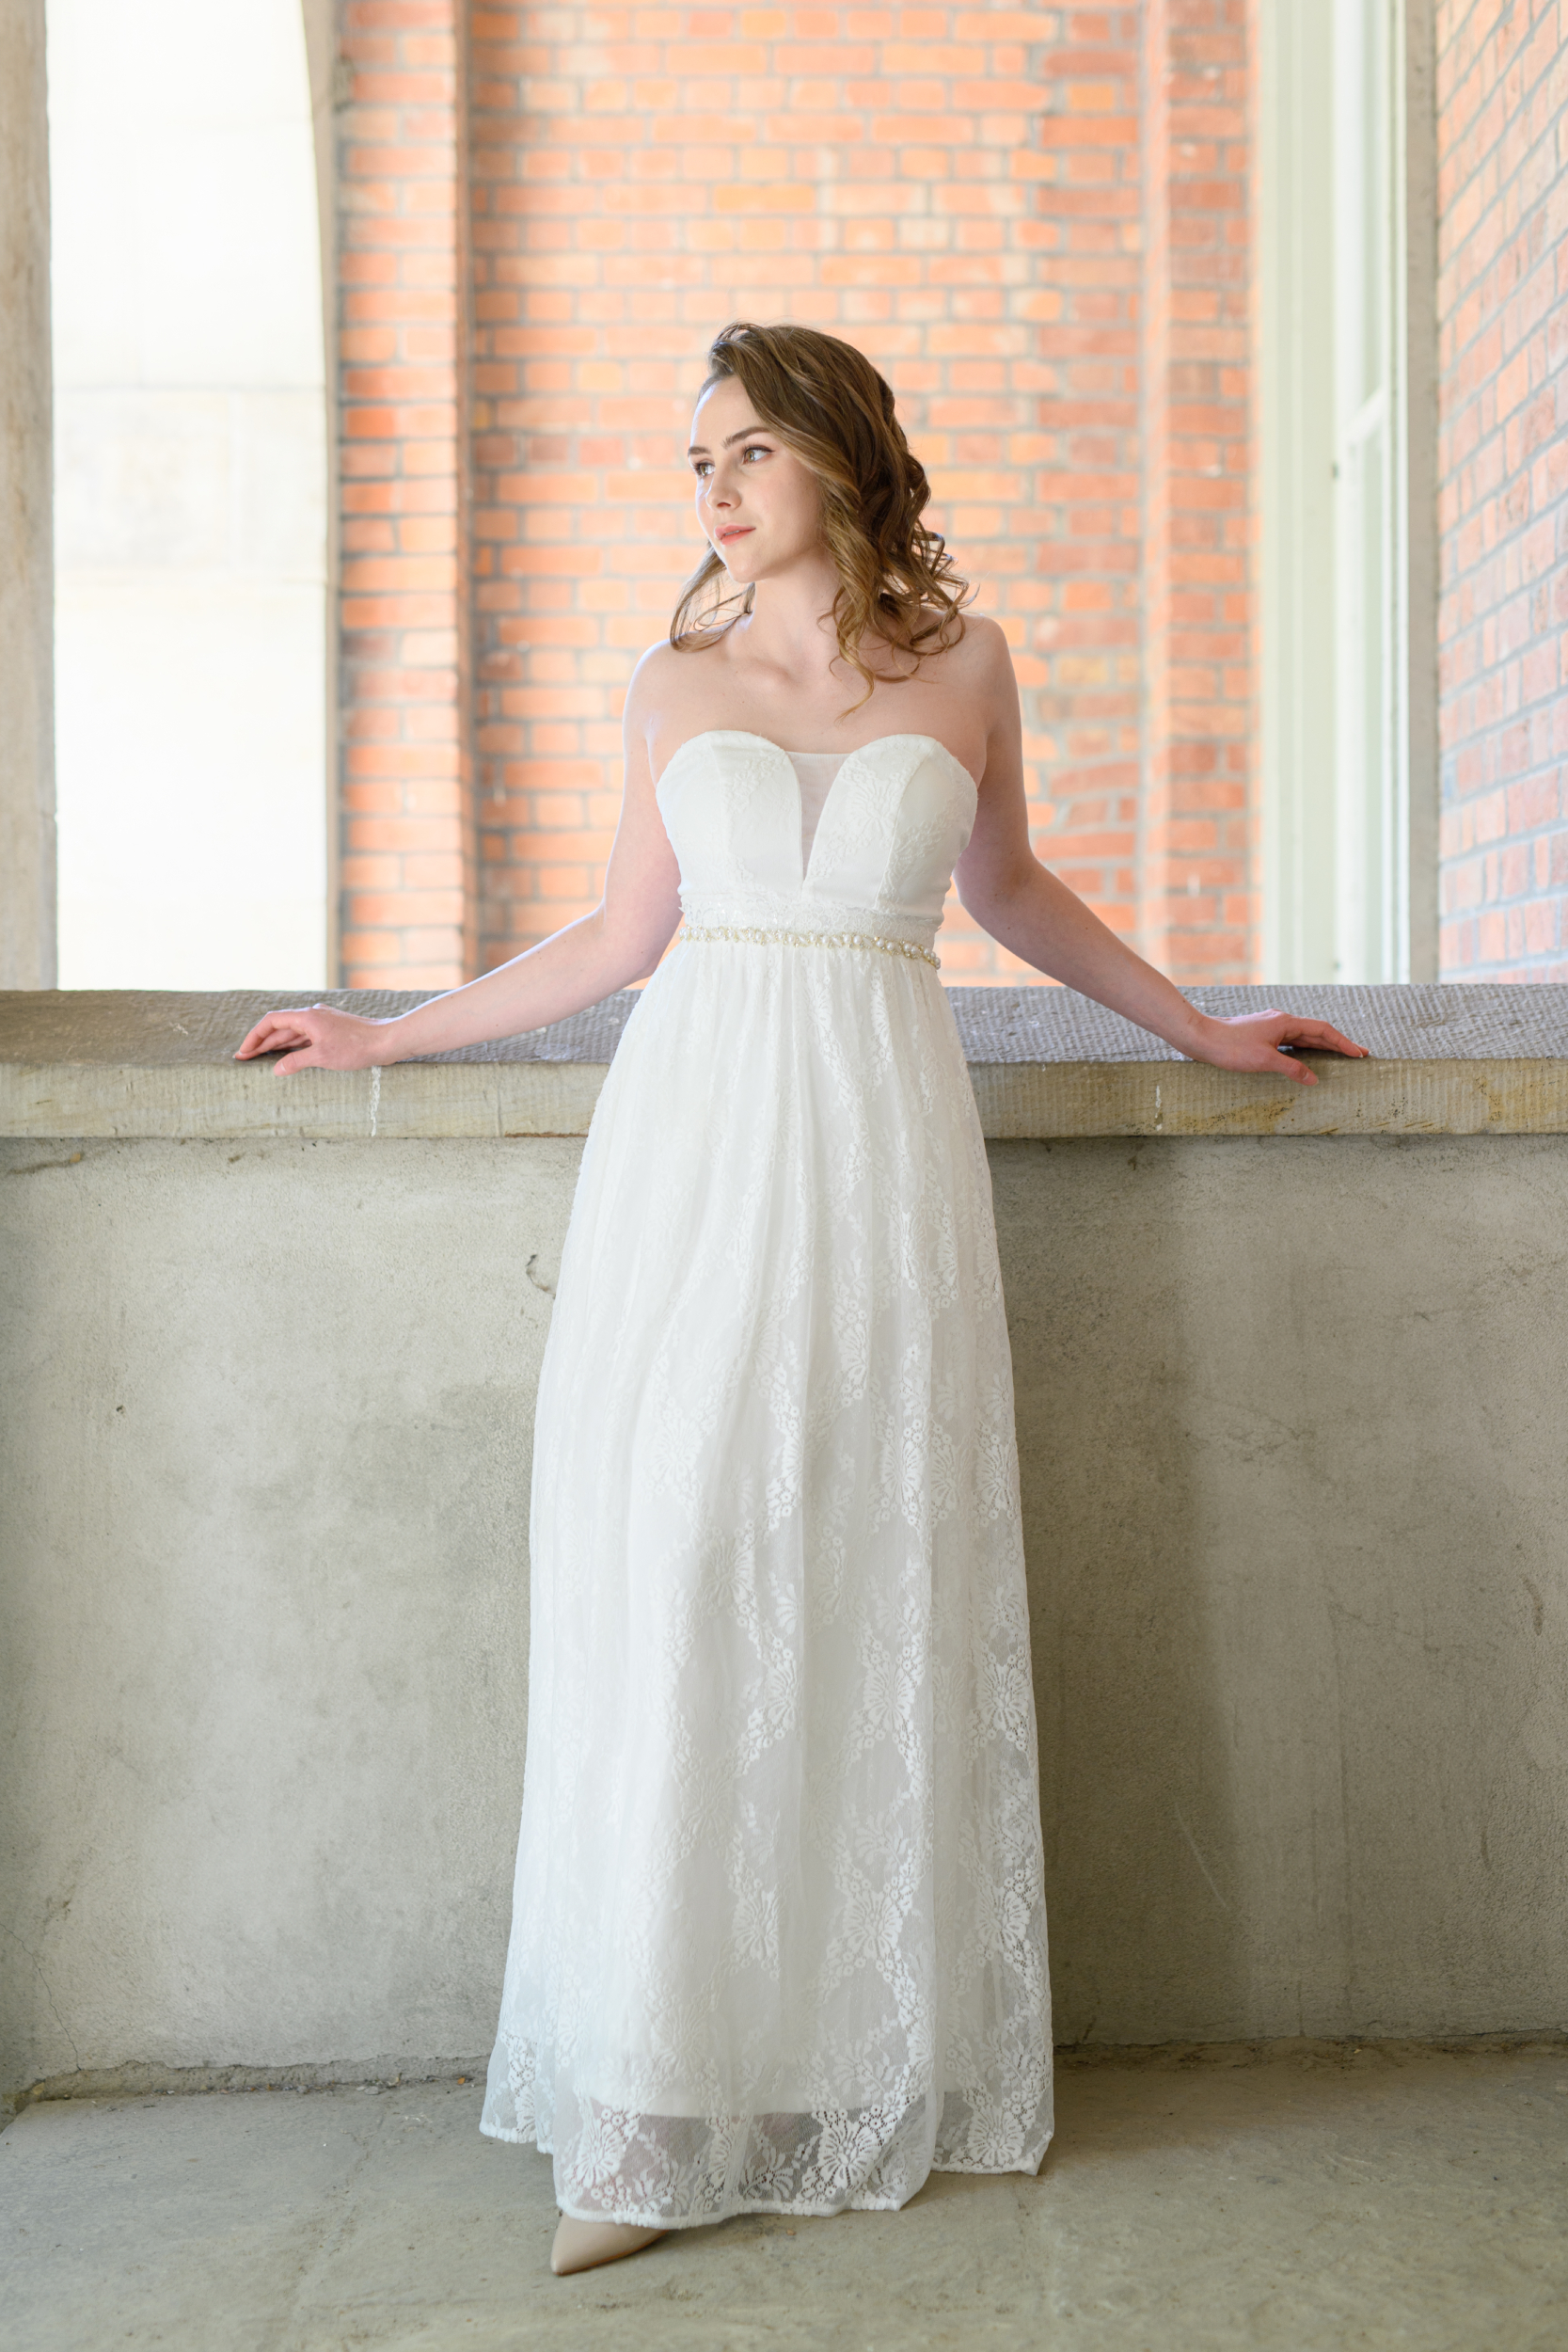 Introducing Gloria, a captivating strapless sheath wedding dress that embodies timeless beauty. The sweetheart and illusion neckline accentuate your natural grace and beauty. Detailed beads and pearls on the waistline add a touch of glamour and sophistication to this simple yet elegant gown.